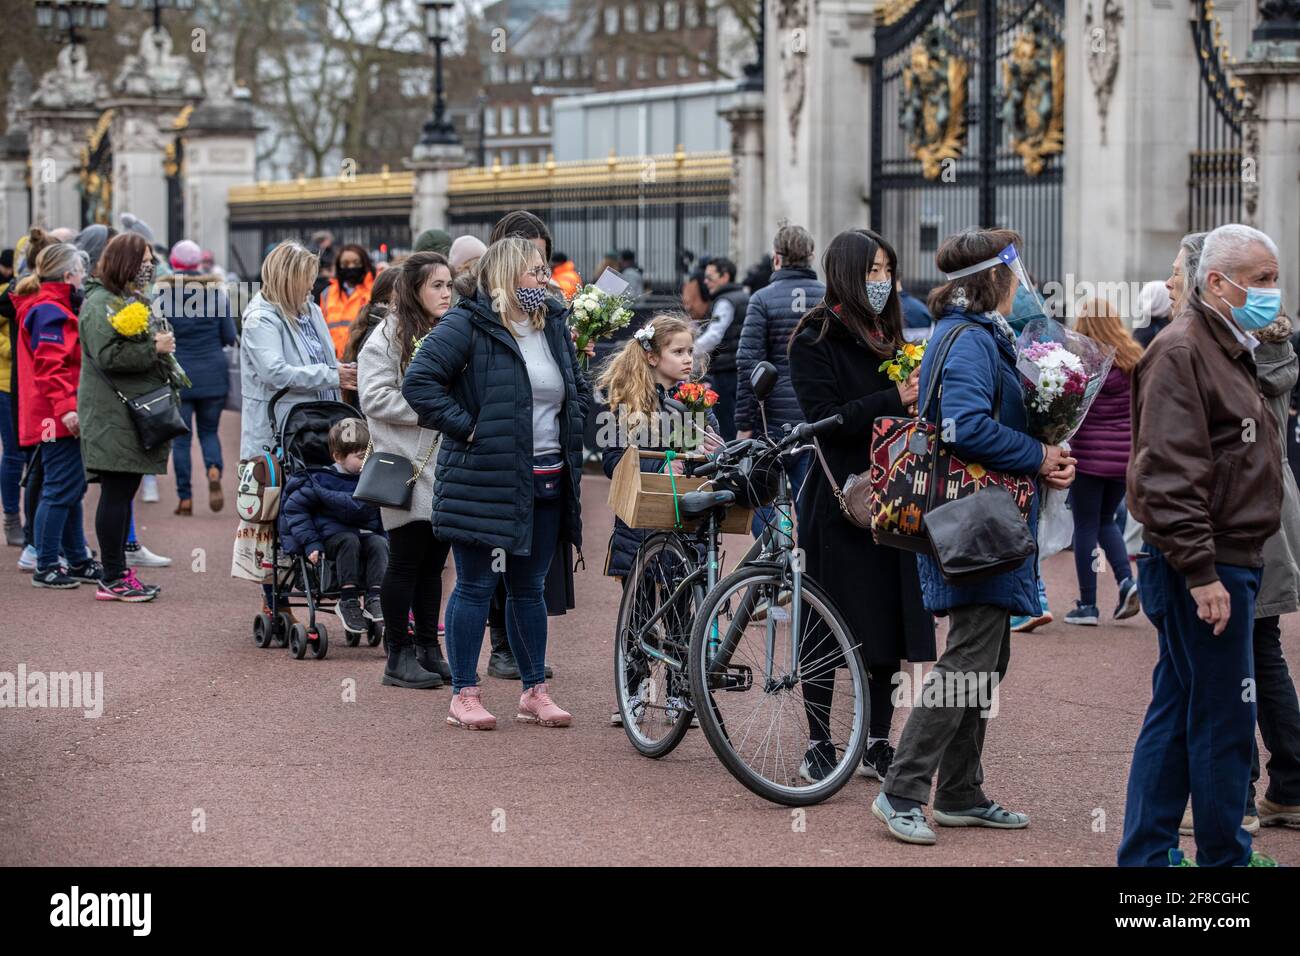 Well wishers queue to lay flowers to show their respects for Duke of Edinburgh outside Buckingham Palace after the Palace announced his death. Stock Photo